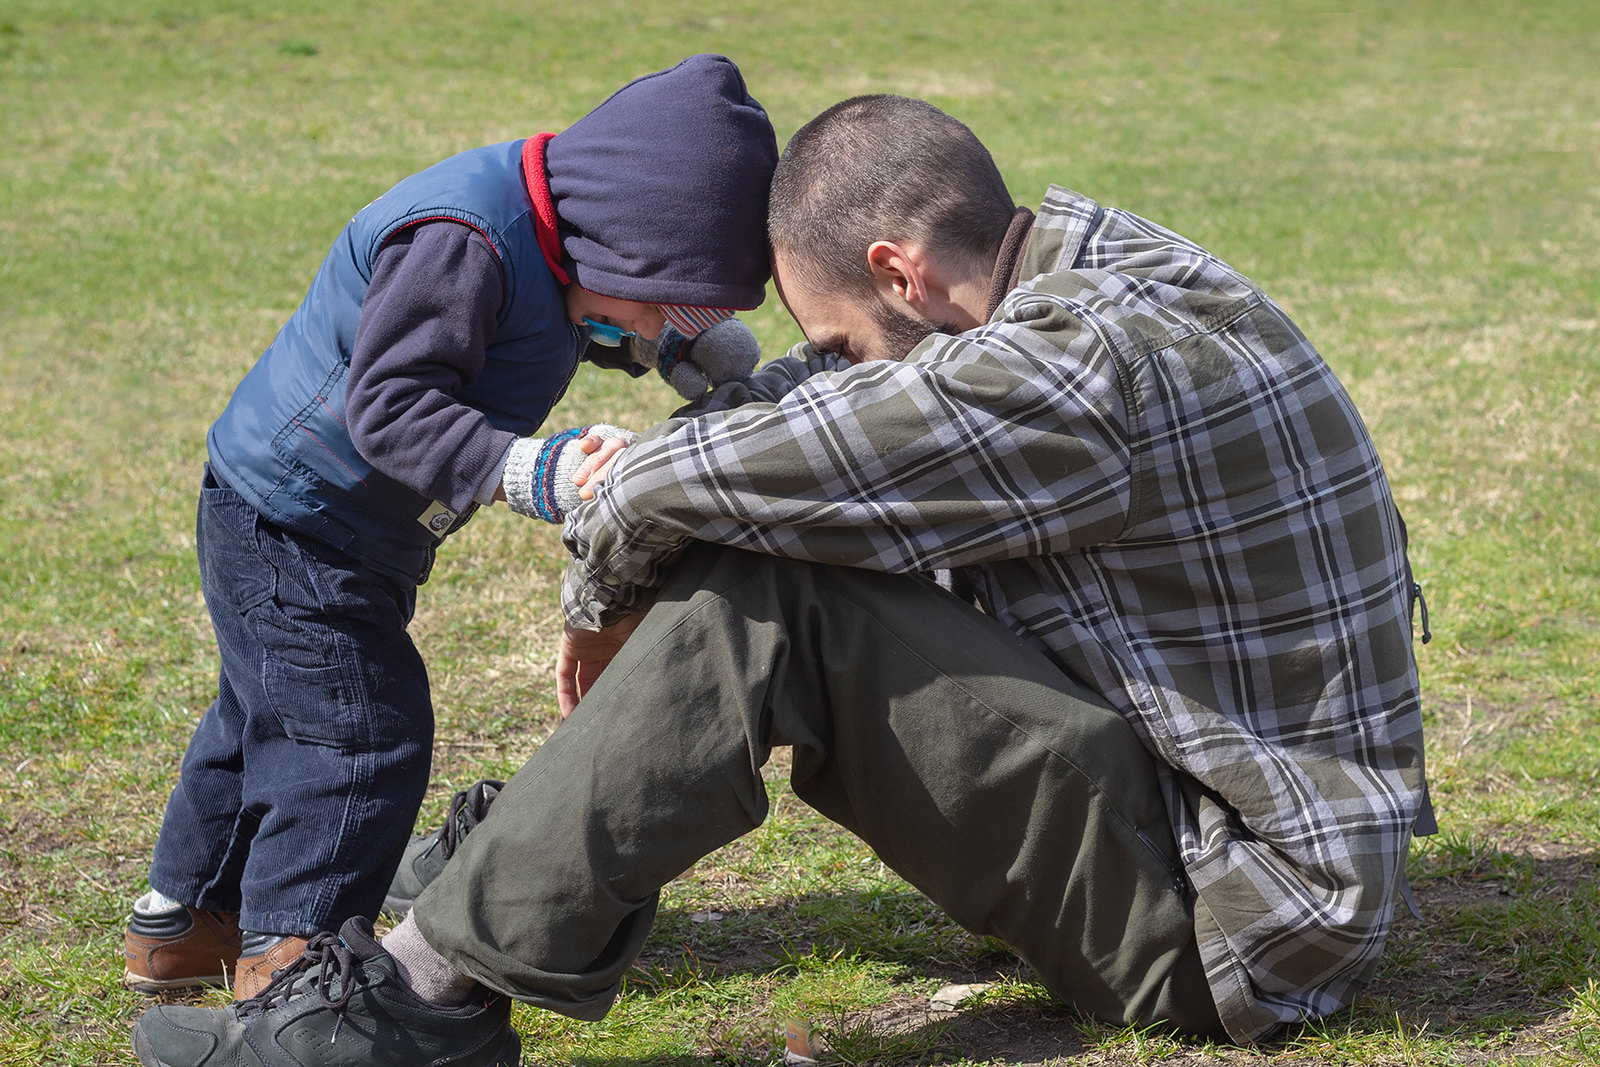 A father and son sitting on a grassy field | Source: Flickr